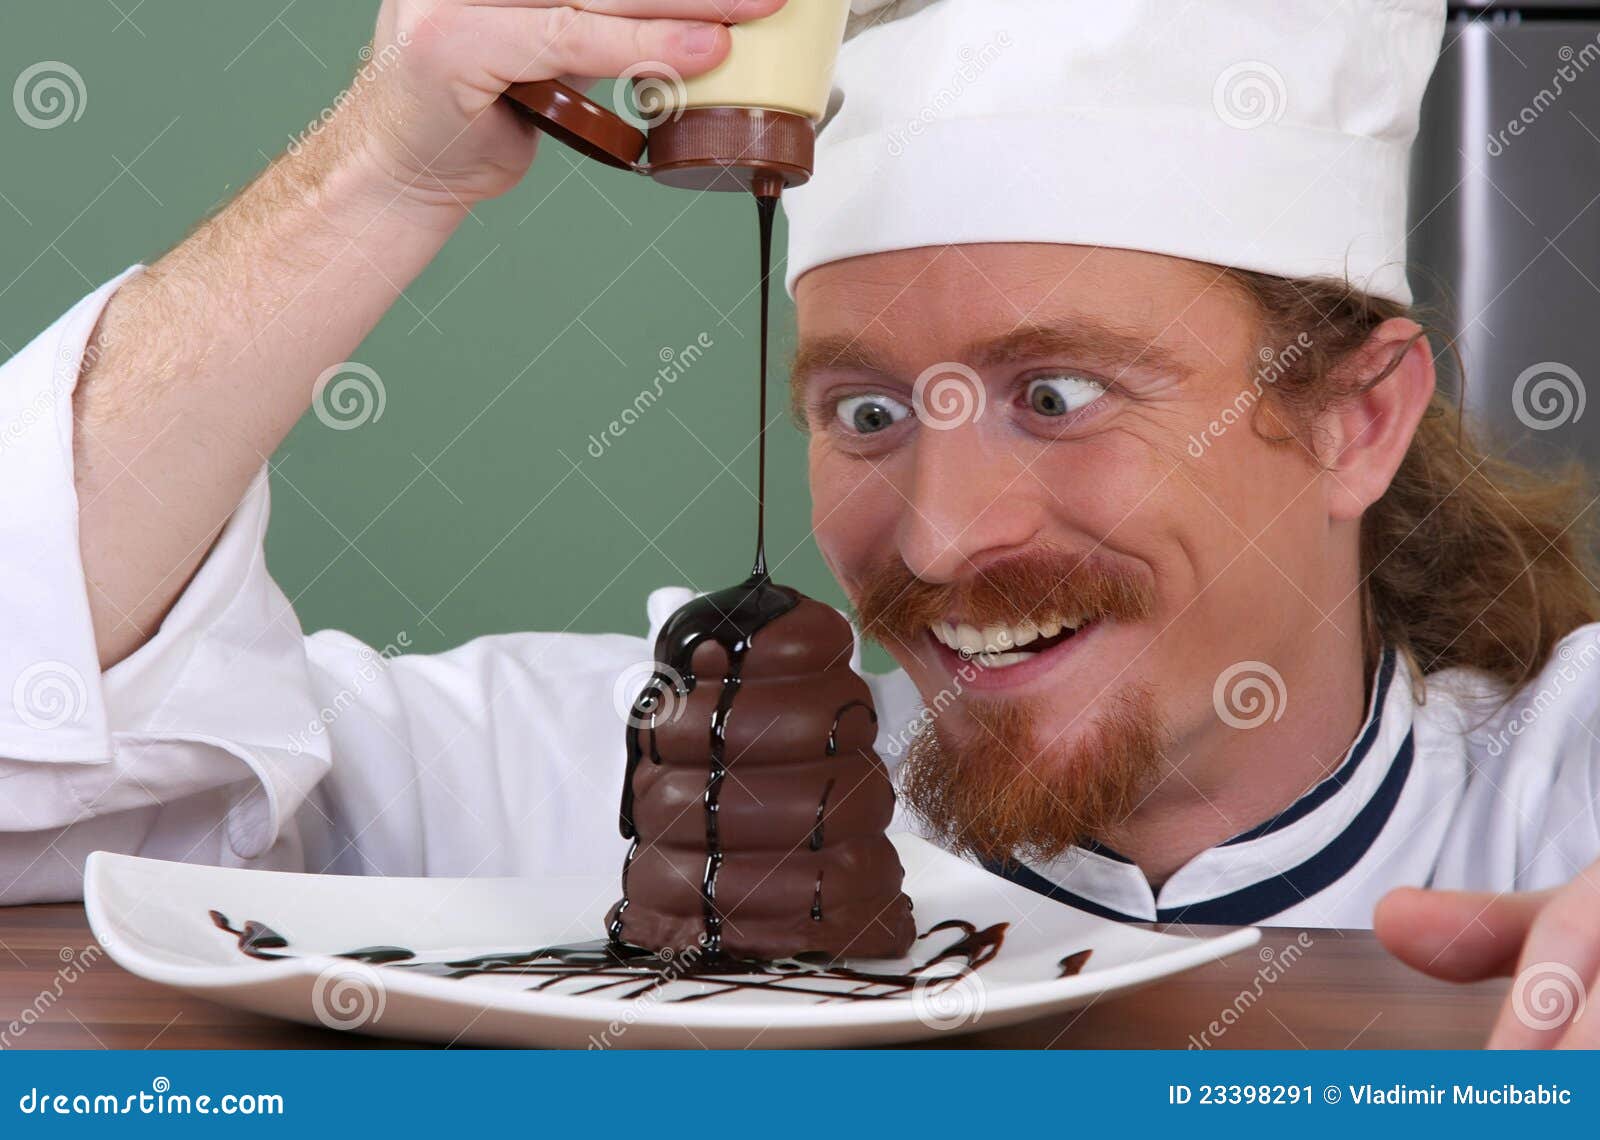 chef added chocolate sauce at piece of cake